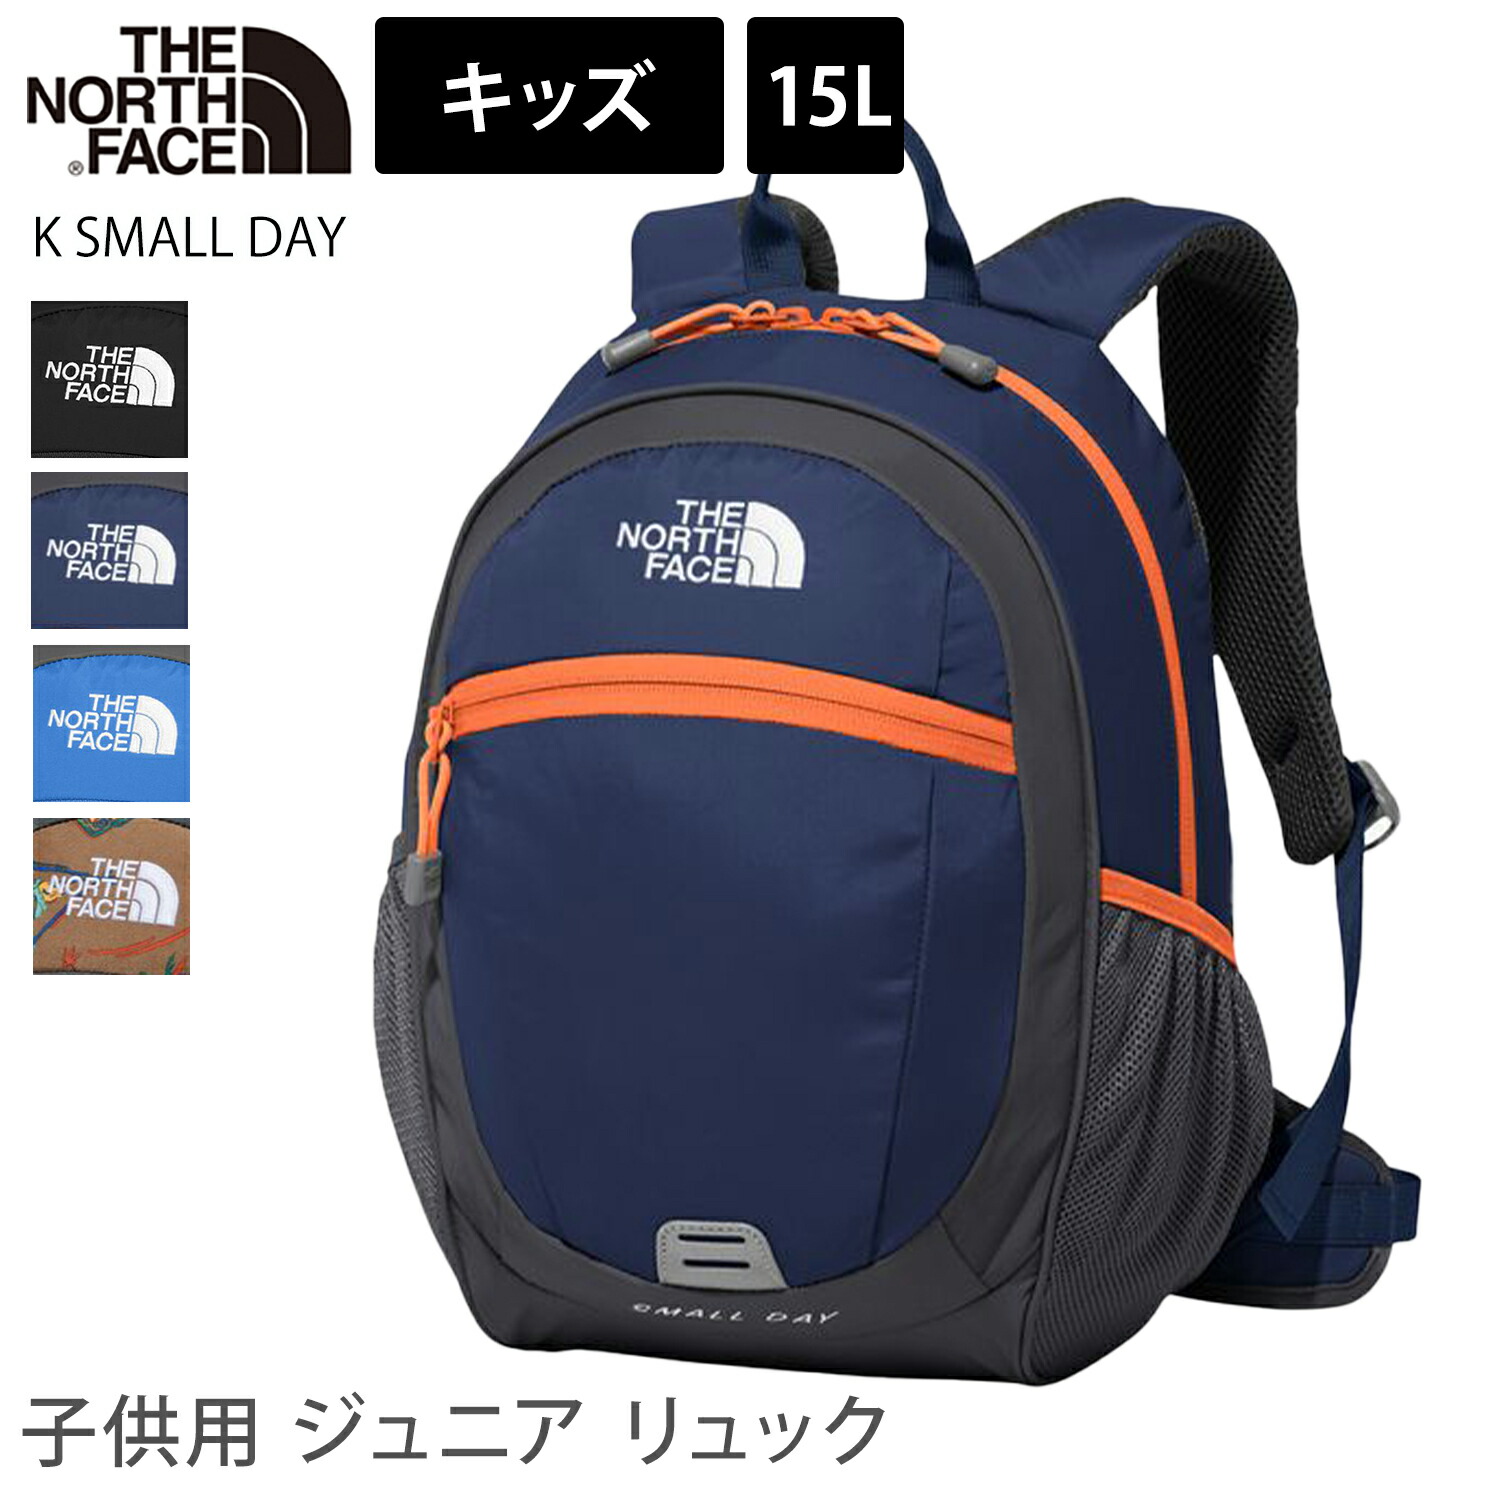 theNorth faceキッズバックパック